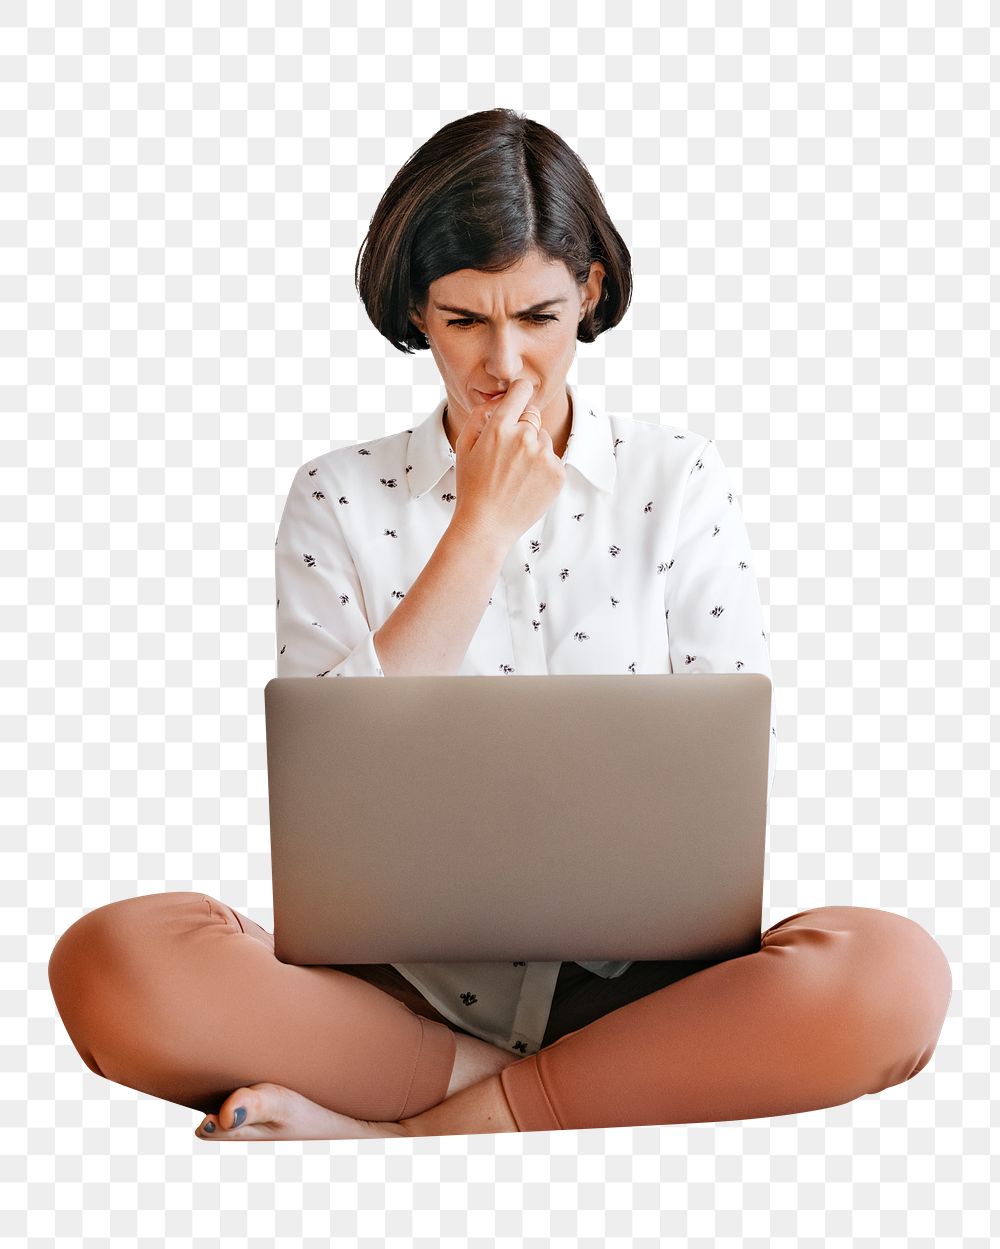 Remote hard-working woman  png, transparent background